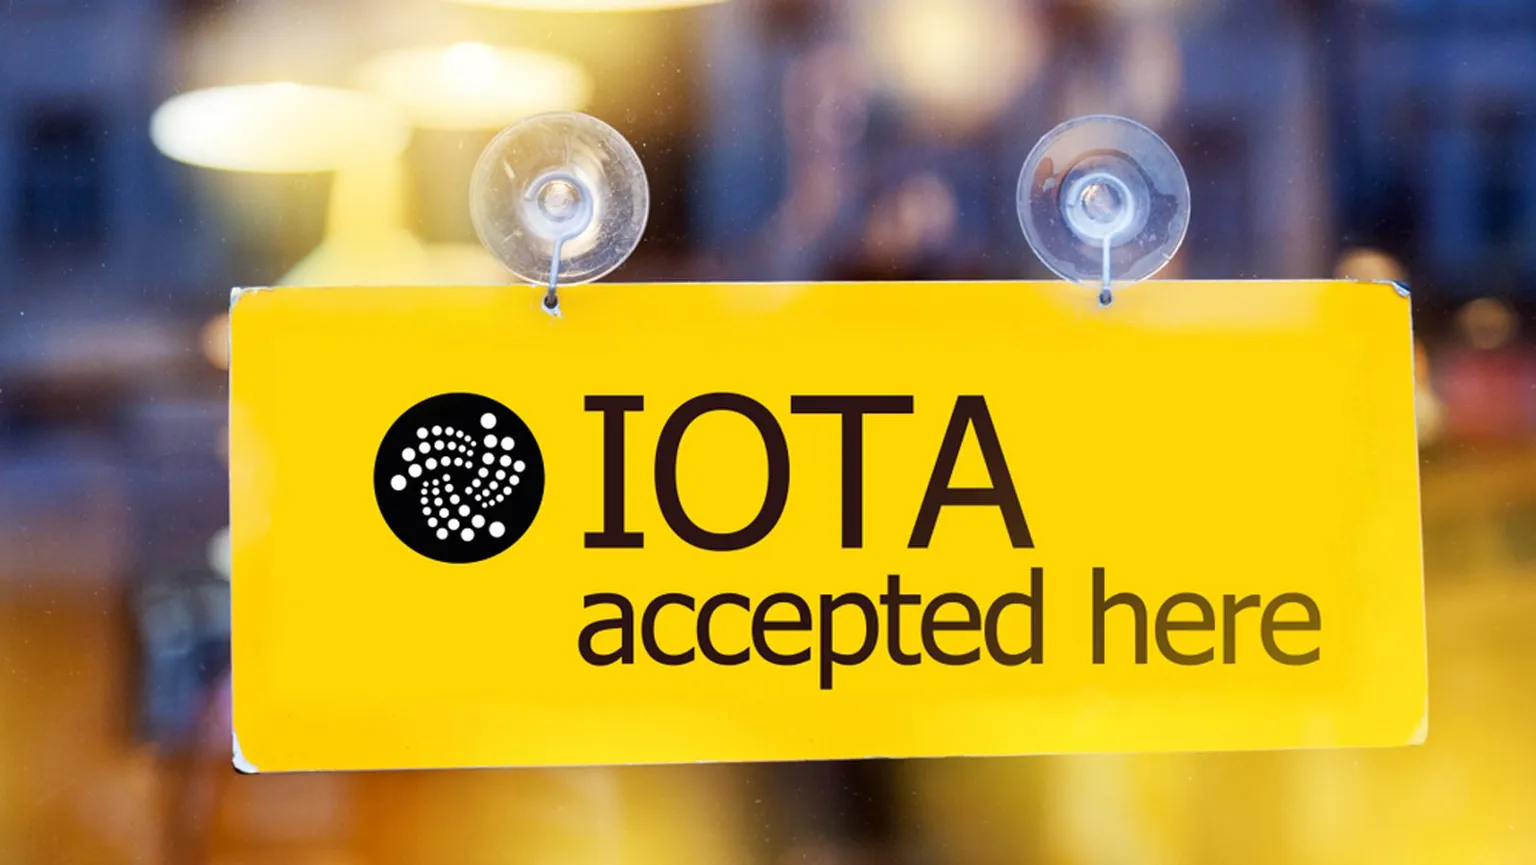 IOTA turns IoT devices into network nodes for its cryptocurrency distributed ledger. PHOTO CREDIT: Shutterstock